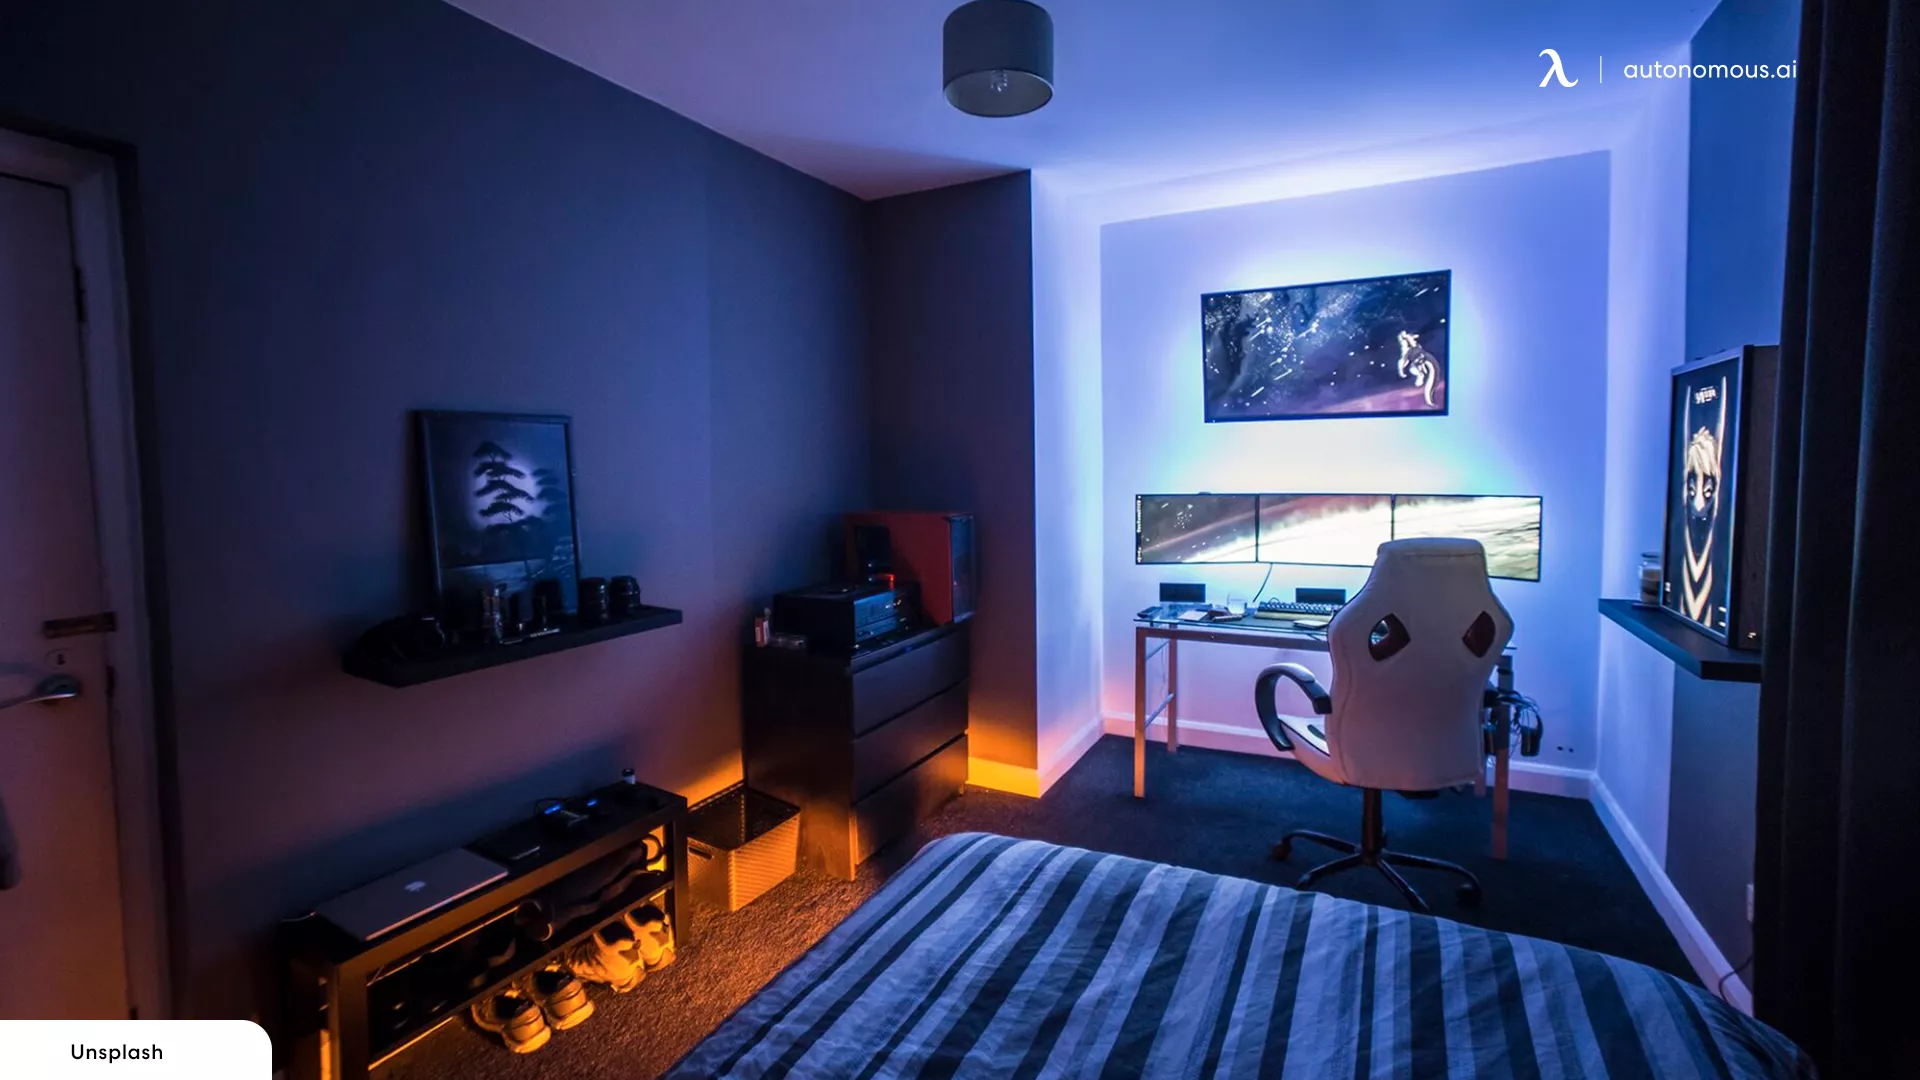 A Bed Might Help PS5 gaming setup